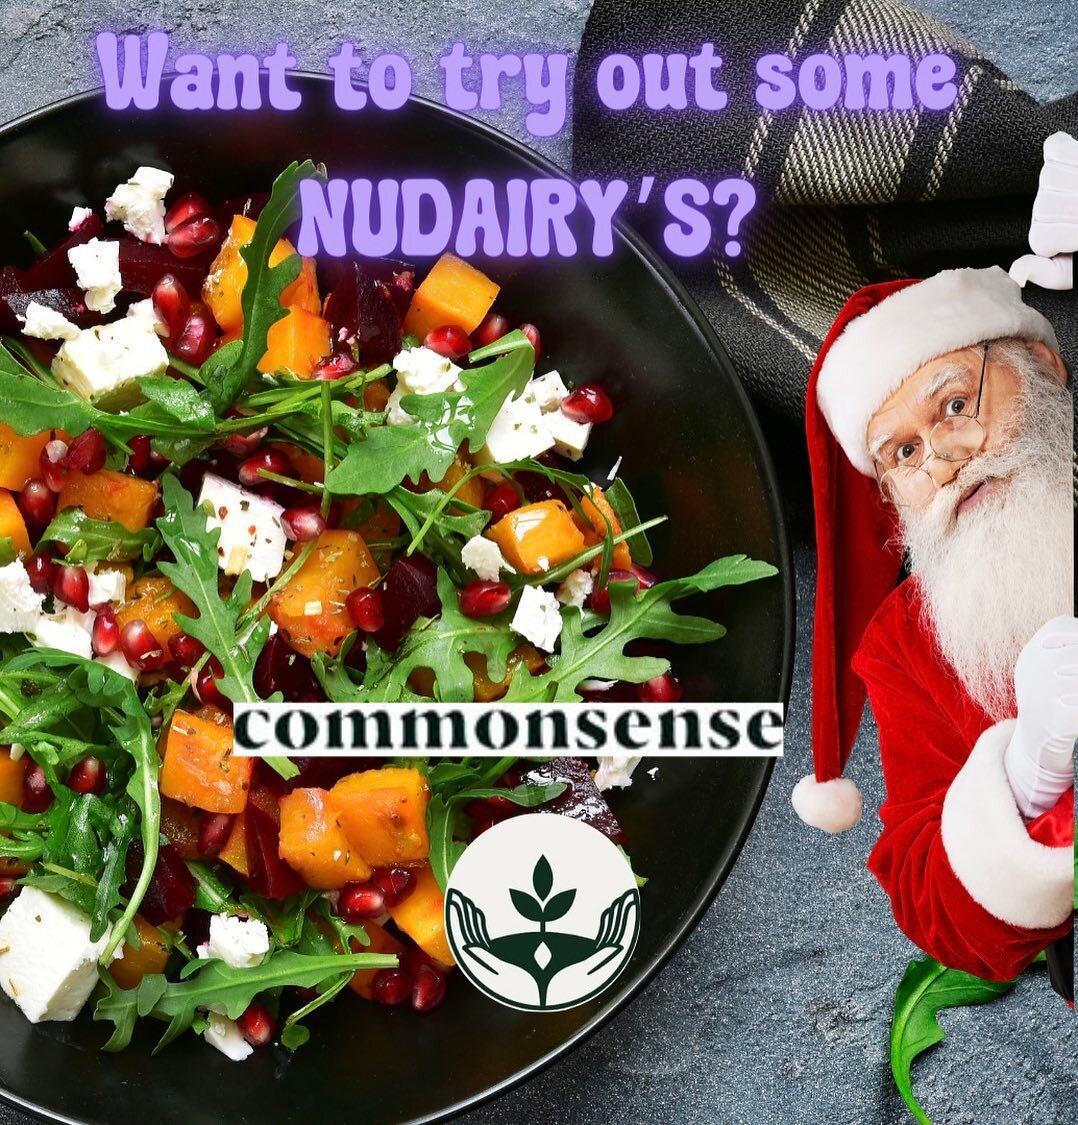 Let&rsquo;s get festive and take your taste buds on a journey with @commonsenseorganics  Kilbirnie at their Christmas Market located at 37 Rongotai Road this Saturday 10am-4pm🎄 You will find a tasty spread of Nudairy&rsquo;s delights to try along wi